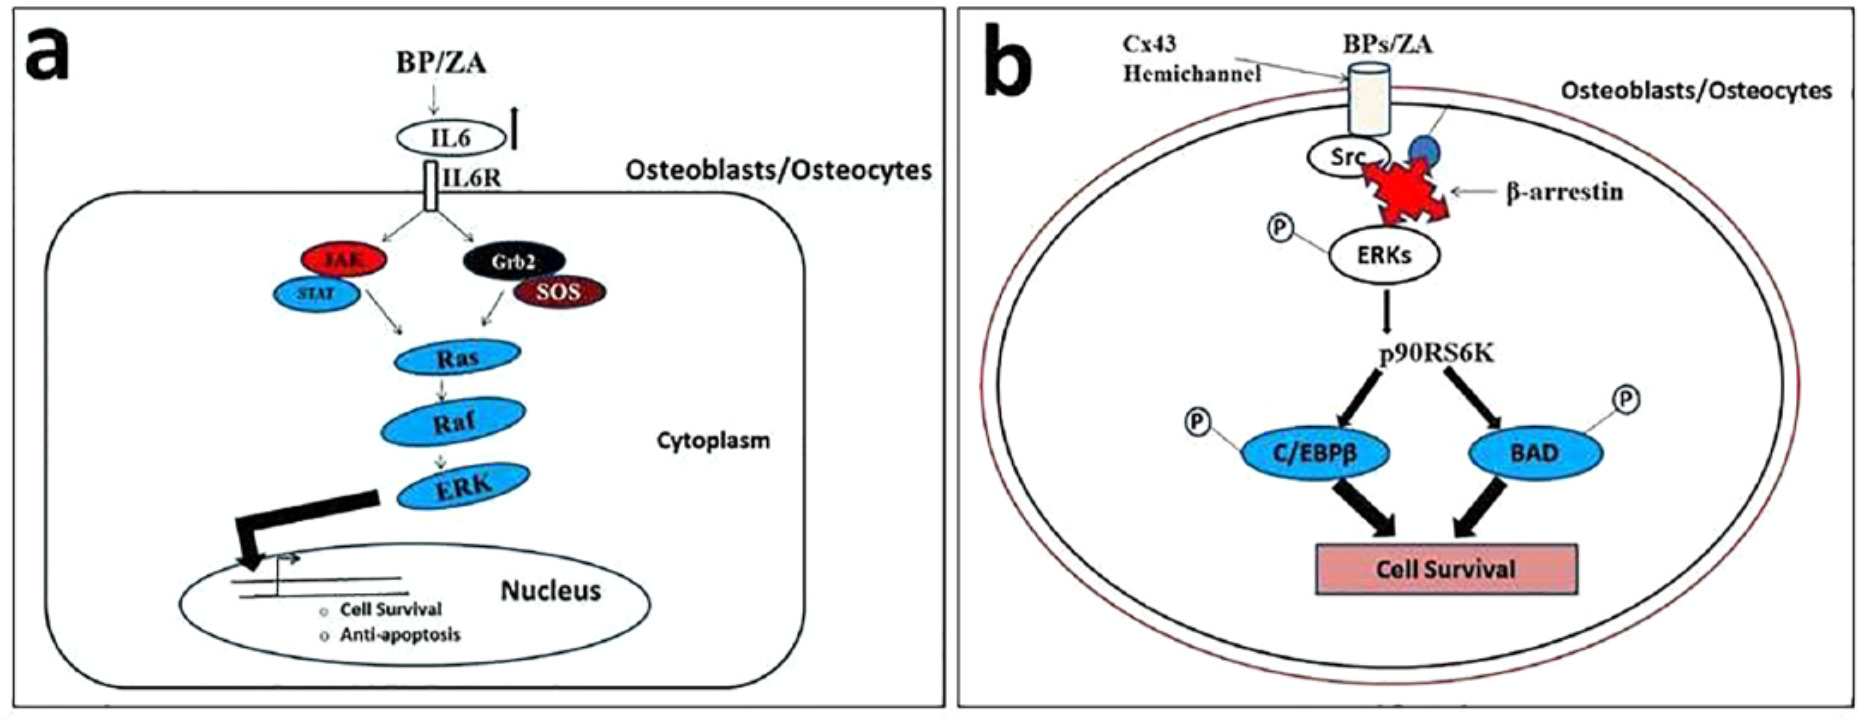 Fig. 8 
          Speculated mechanism of action of zoledronate in vivo for osteoblast survival. Probable in vivo effect of bisphosphonates as a factor for cell survival and osteoblastic differentiation exploiting two different mechanisms and pathways, a) and b). Figure modified from Bellido T, Plotkin LI. Novel actions of bisphosphonates in bone: preservation of osteoblast and osteocyte viability. Bone 2011;49:50–55 (with permission from Elsevier).
        